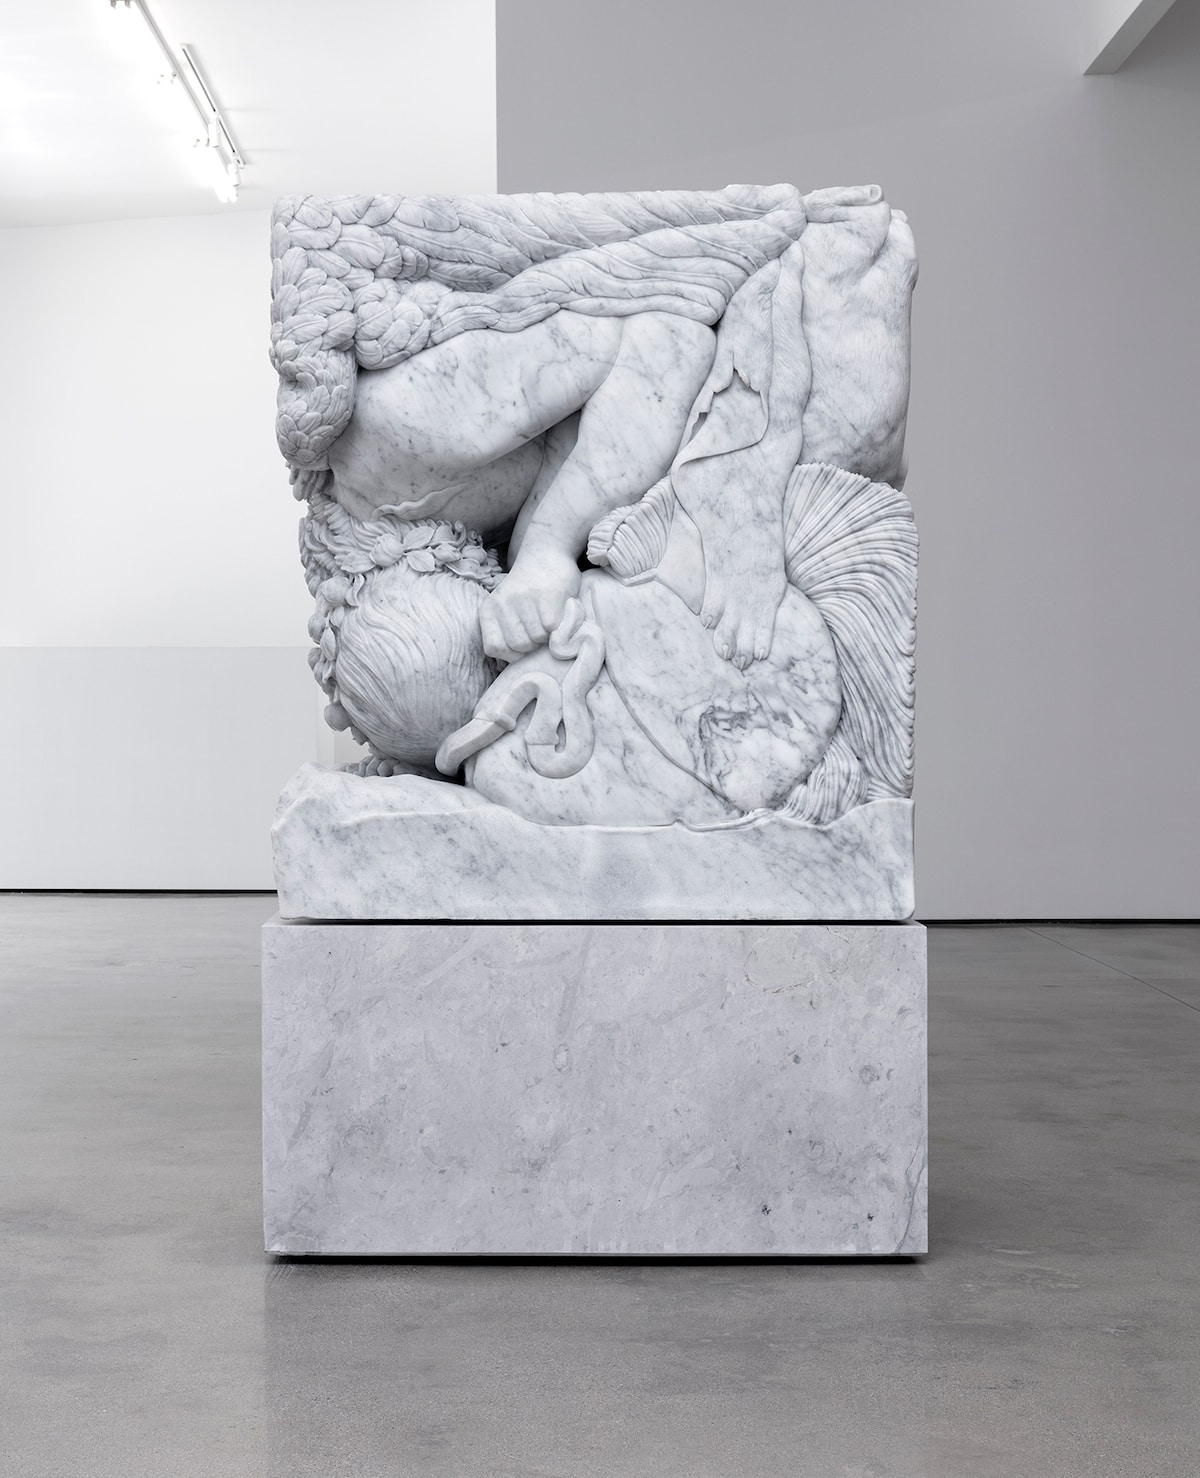 Artist Adam Parker Smith Compresses Classical Sculptures Into Small Marble Cubes (4)